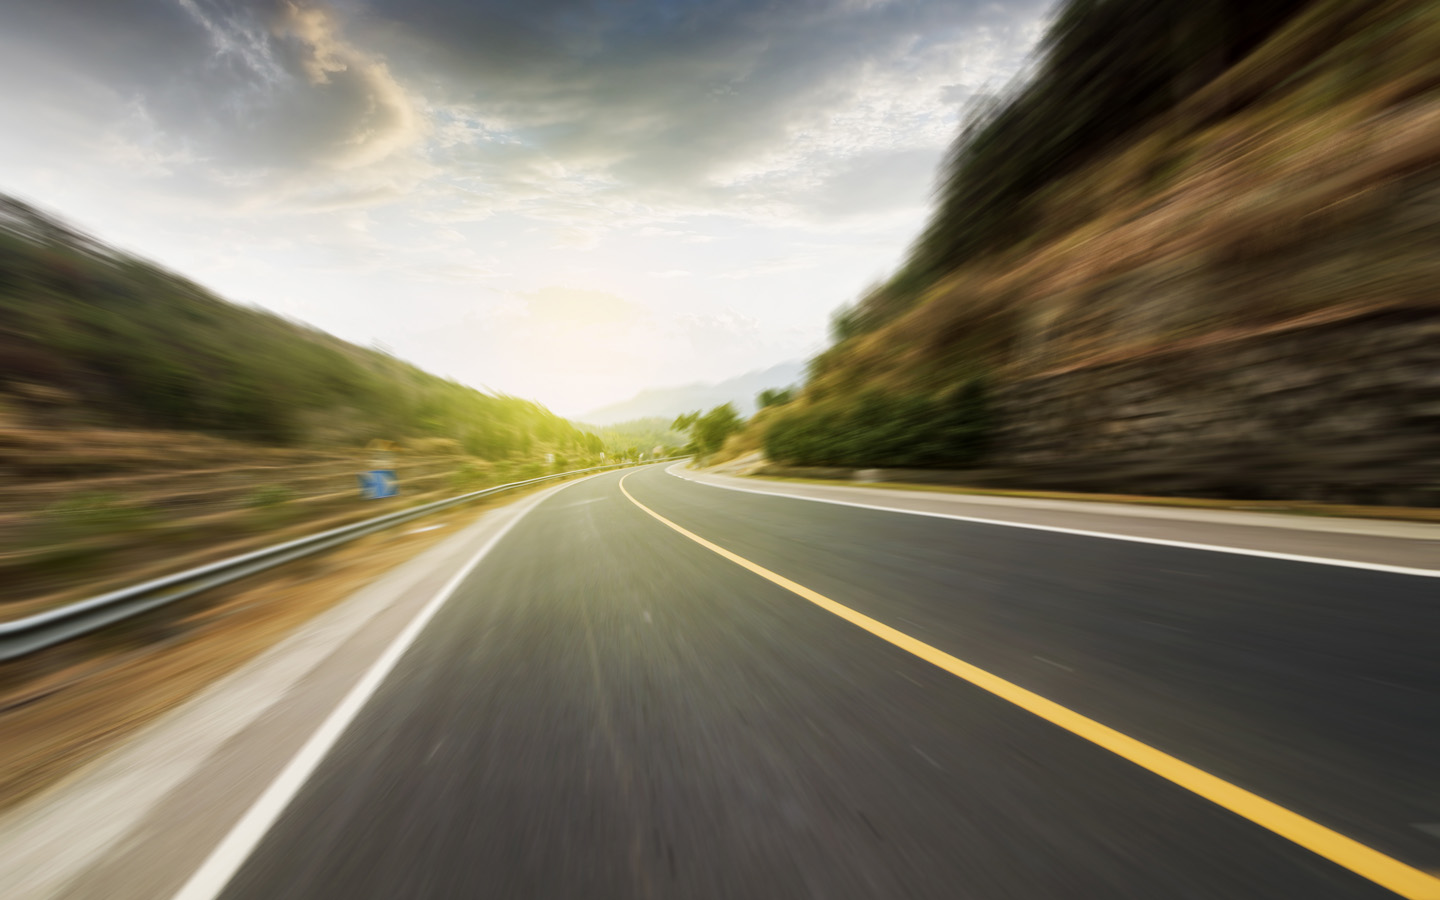 Highway hypnosis can be caused during the travel on monotonous roads such roads between forests